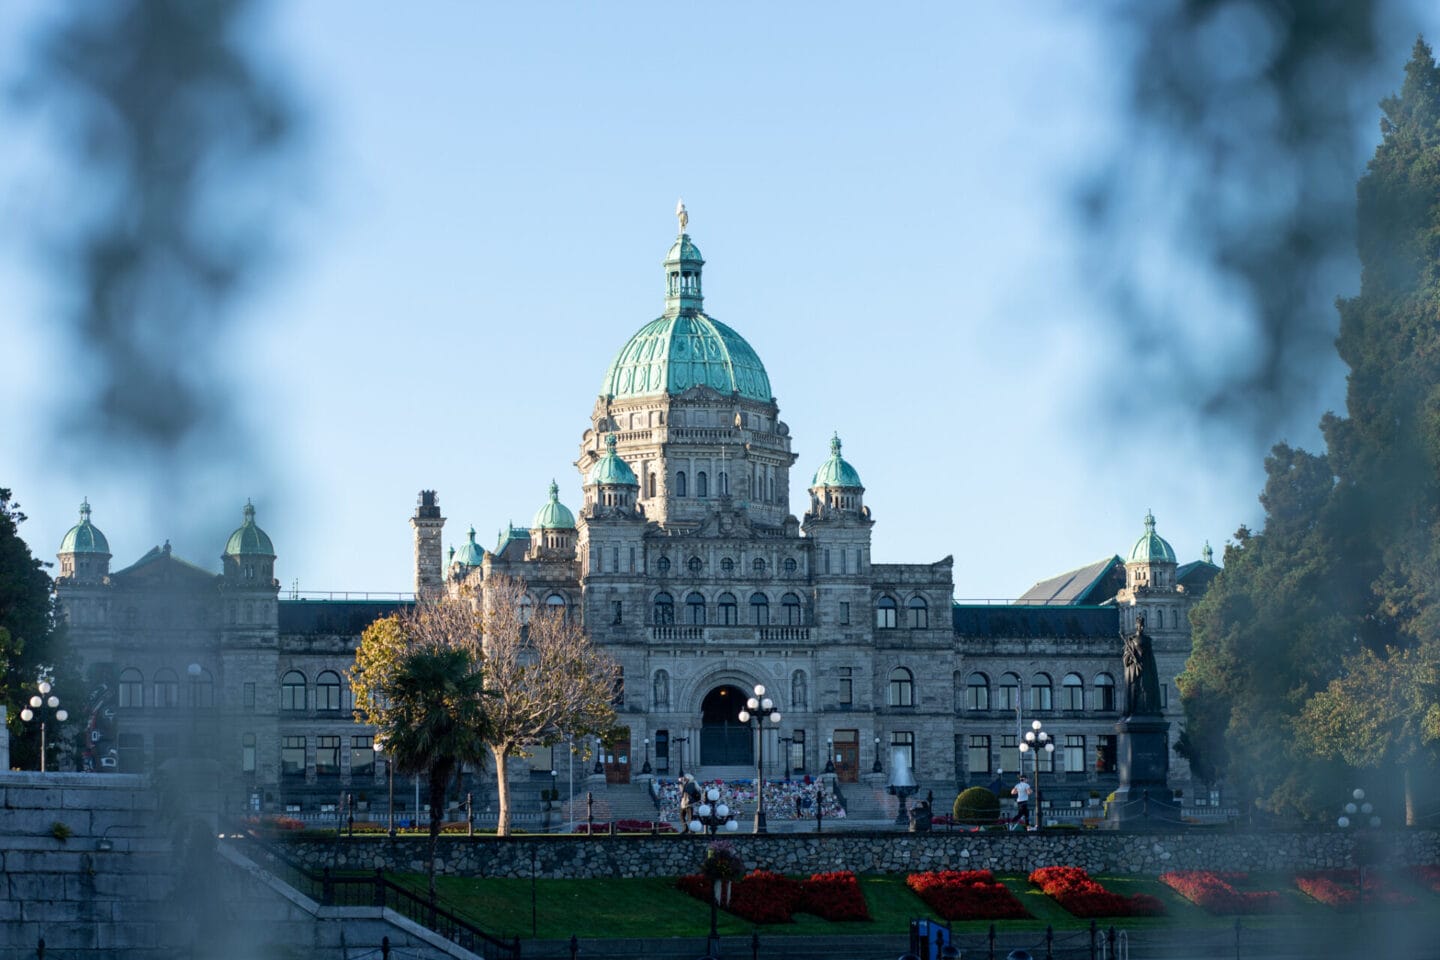 Historical things to do in Victoria BC